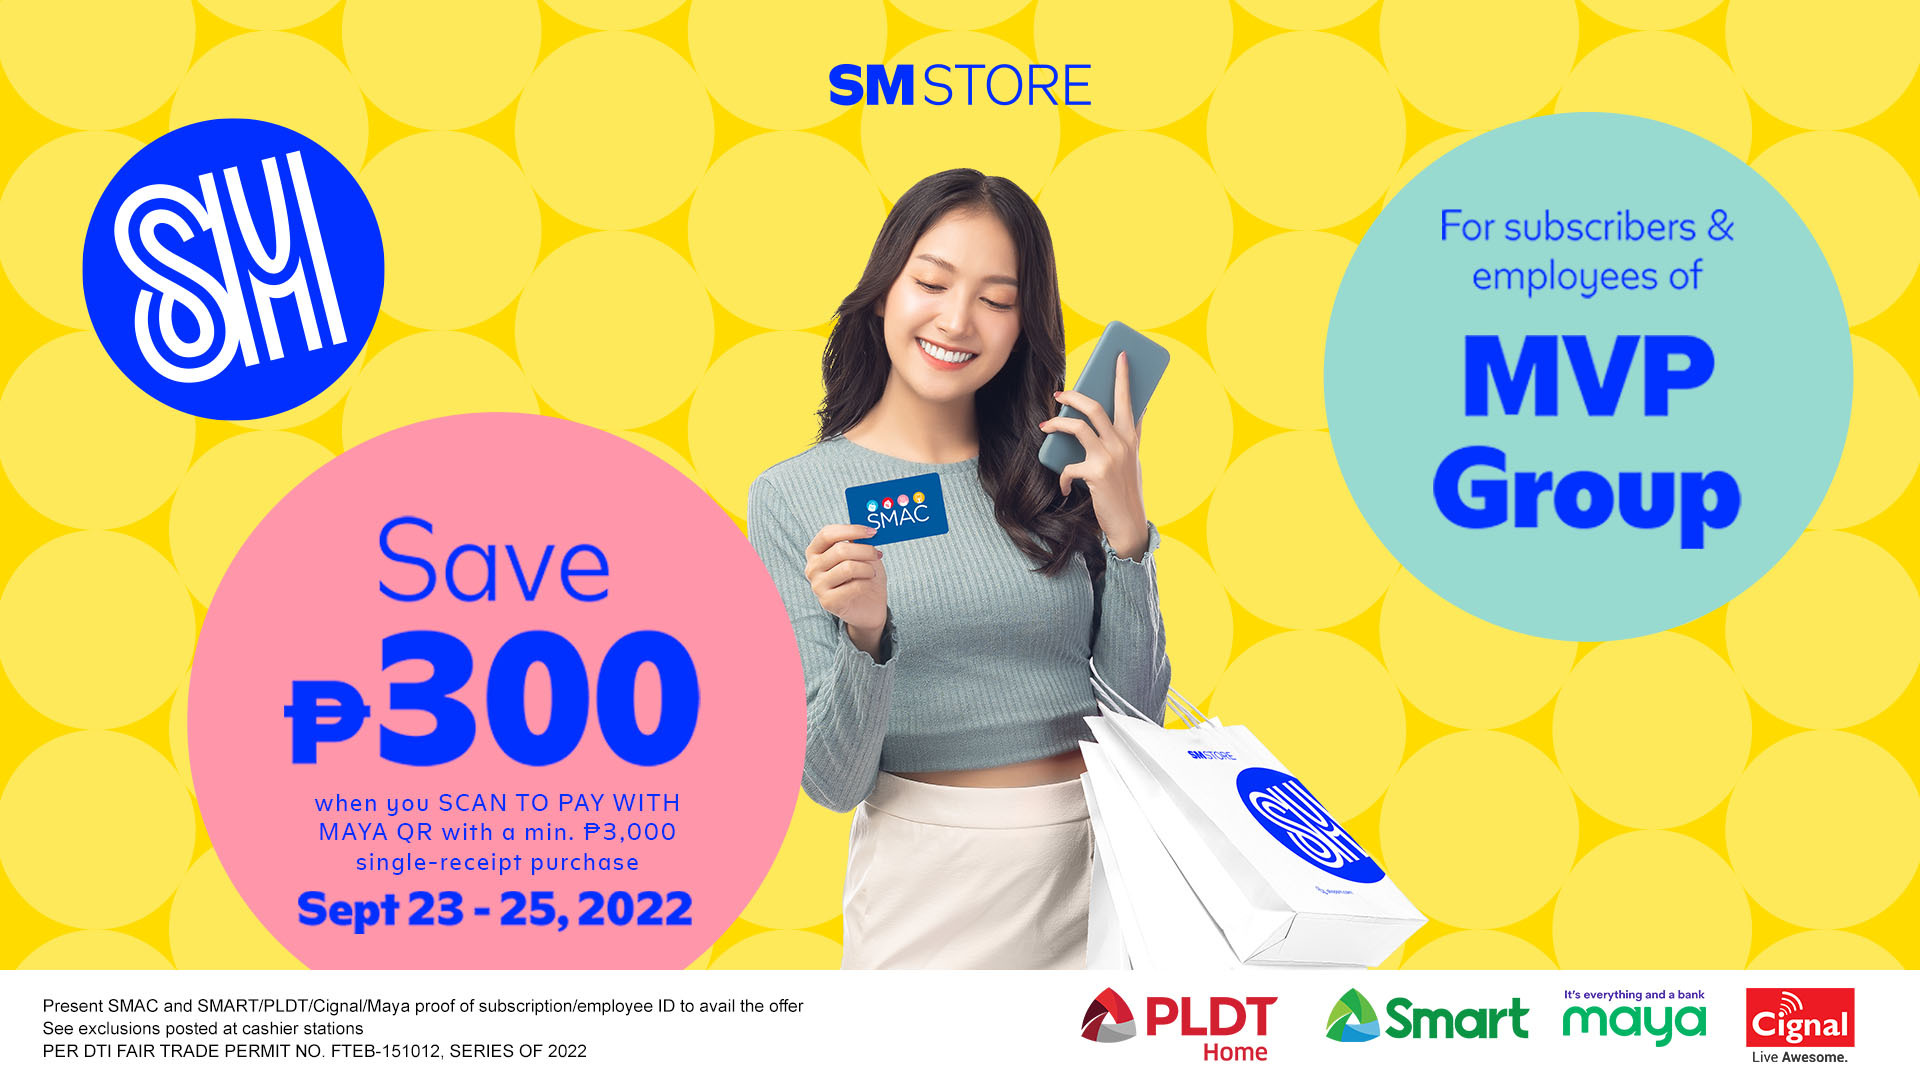 P300 off on your SM Store purchase this weekend!